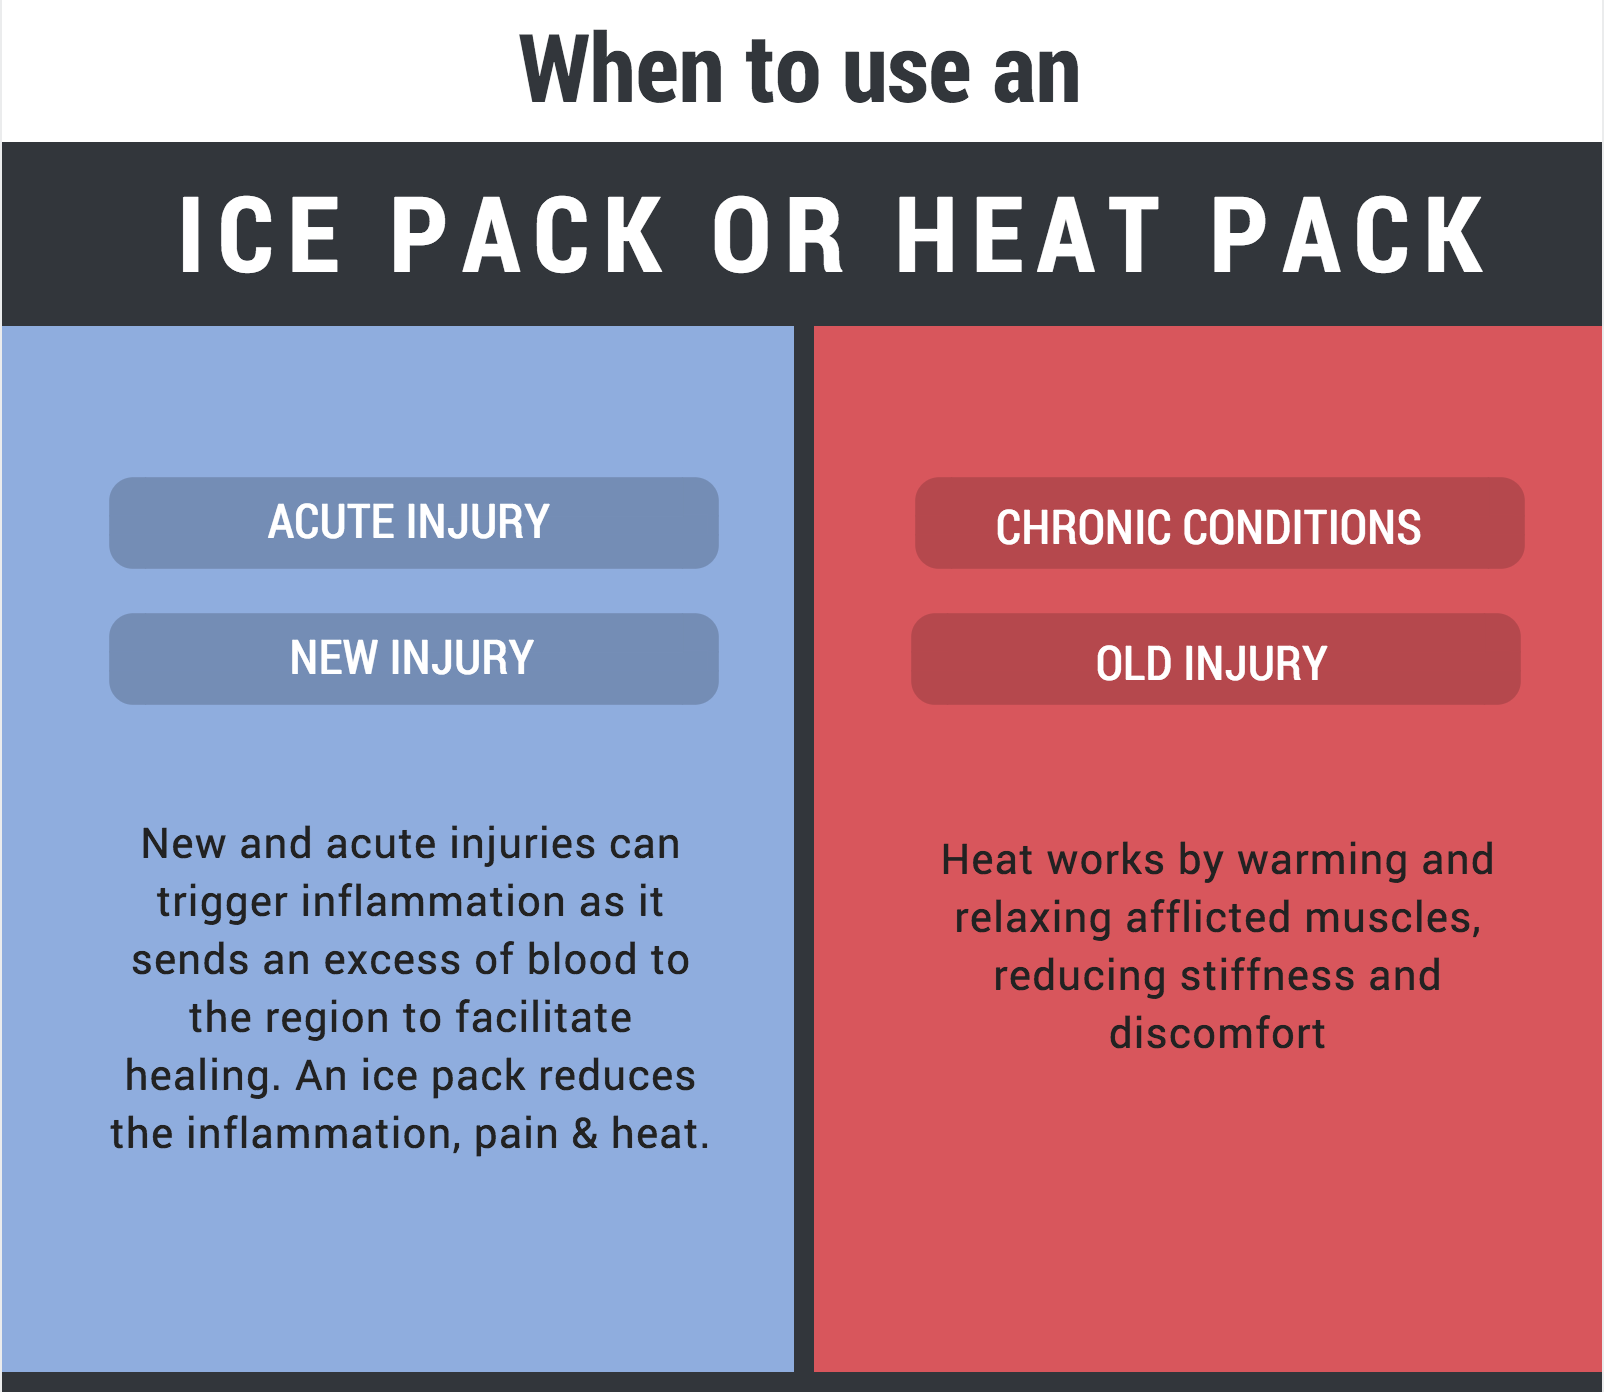 When to use a heat pack or an ice pack on an injury | by Sheena Johnson |  Medium